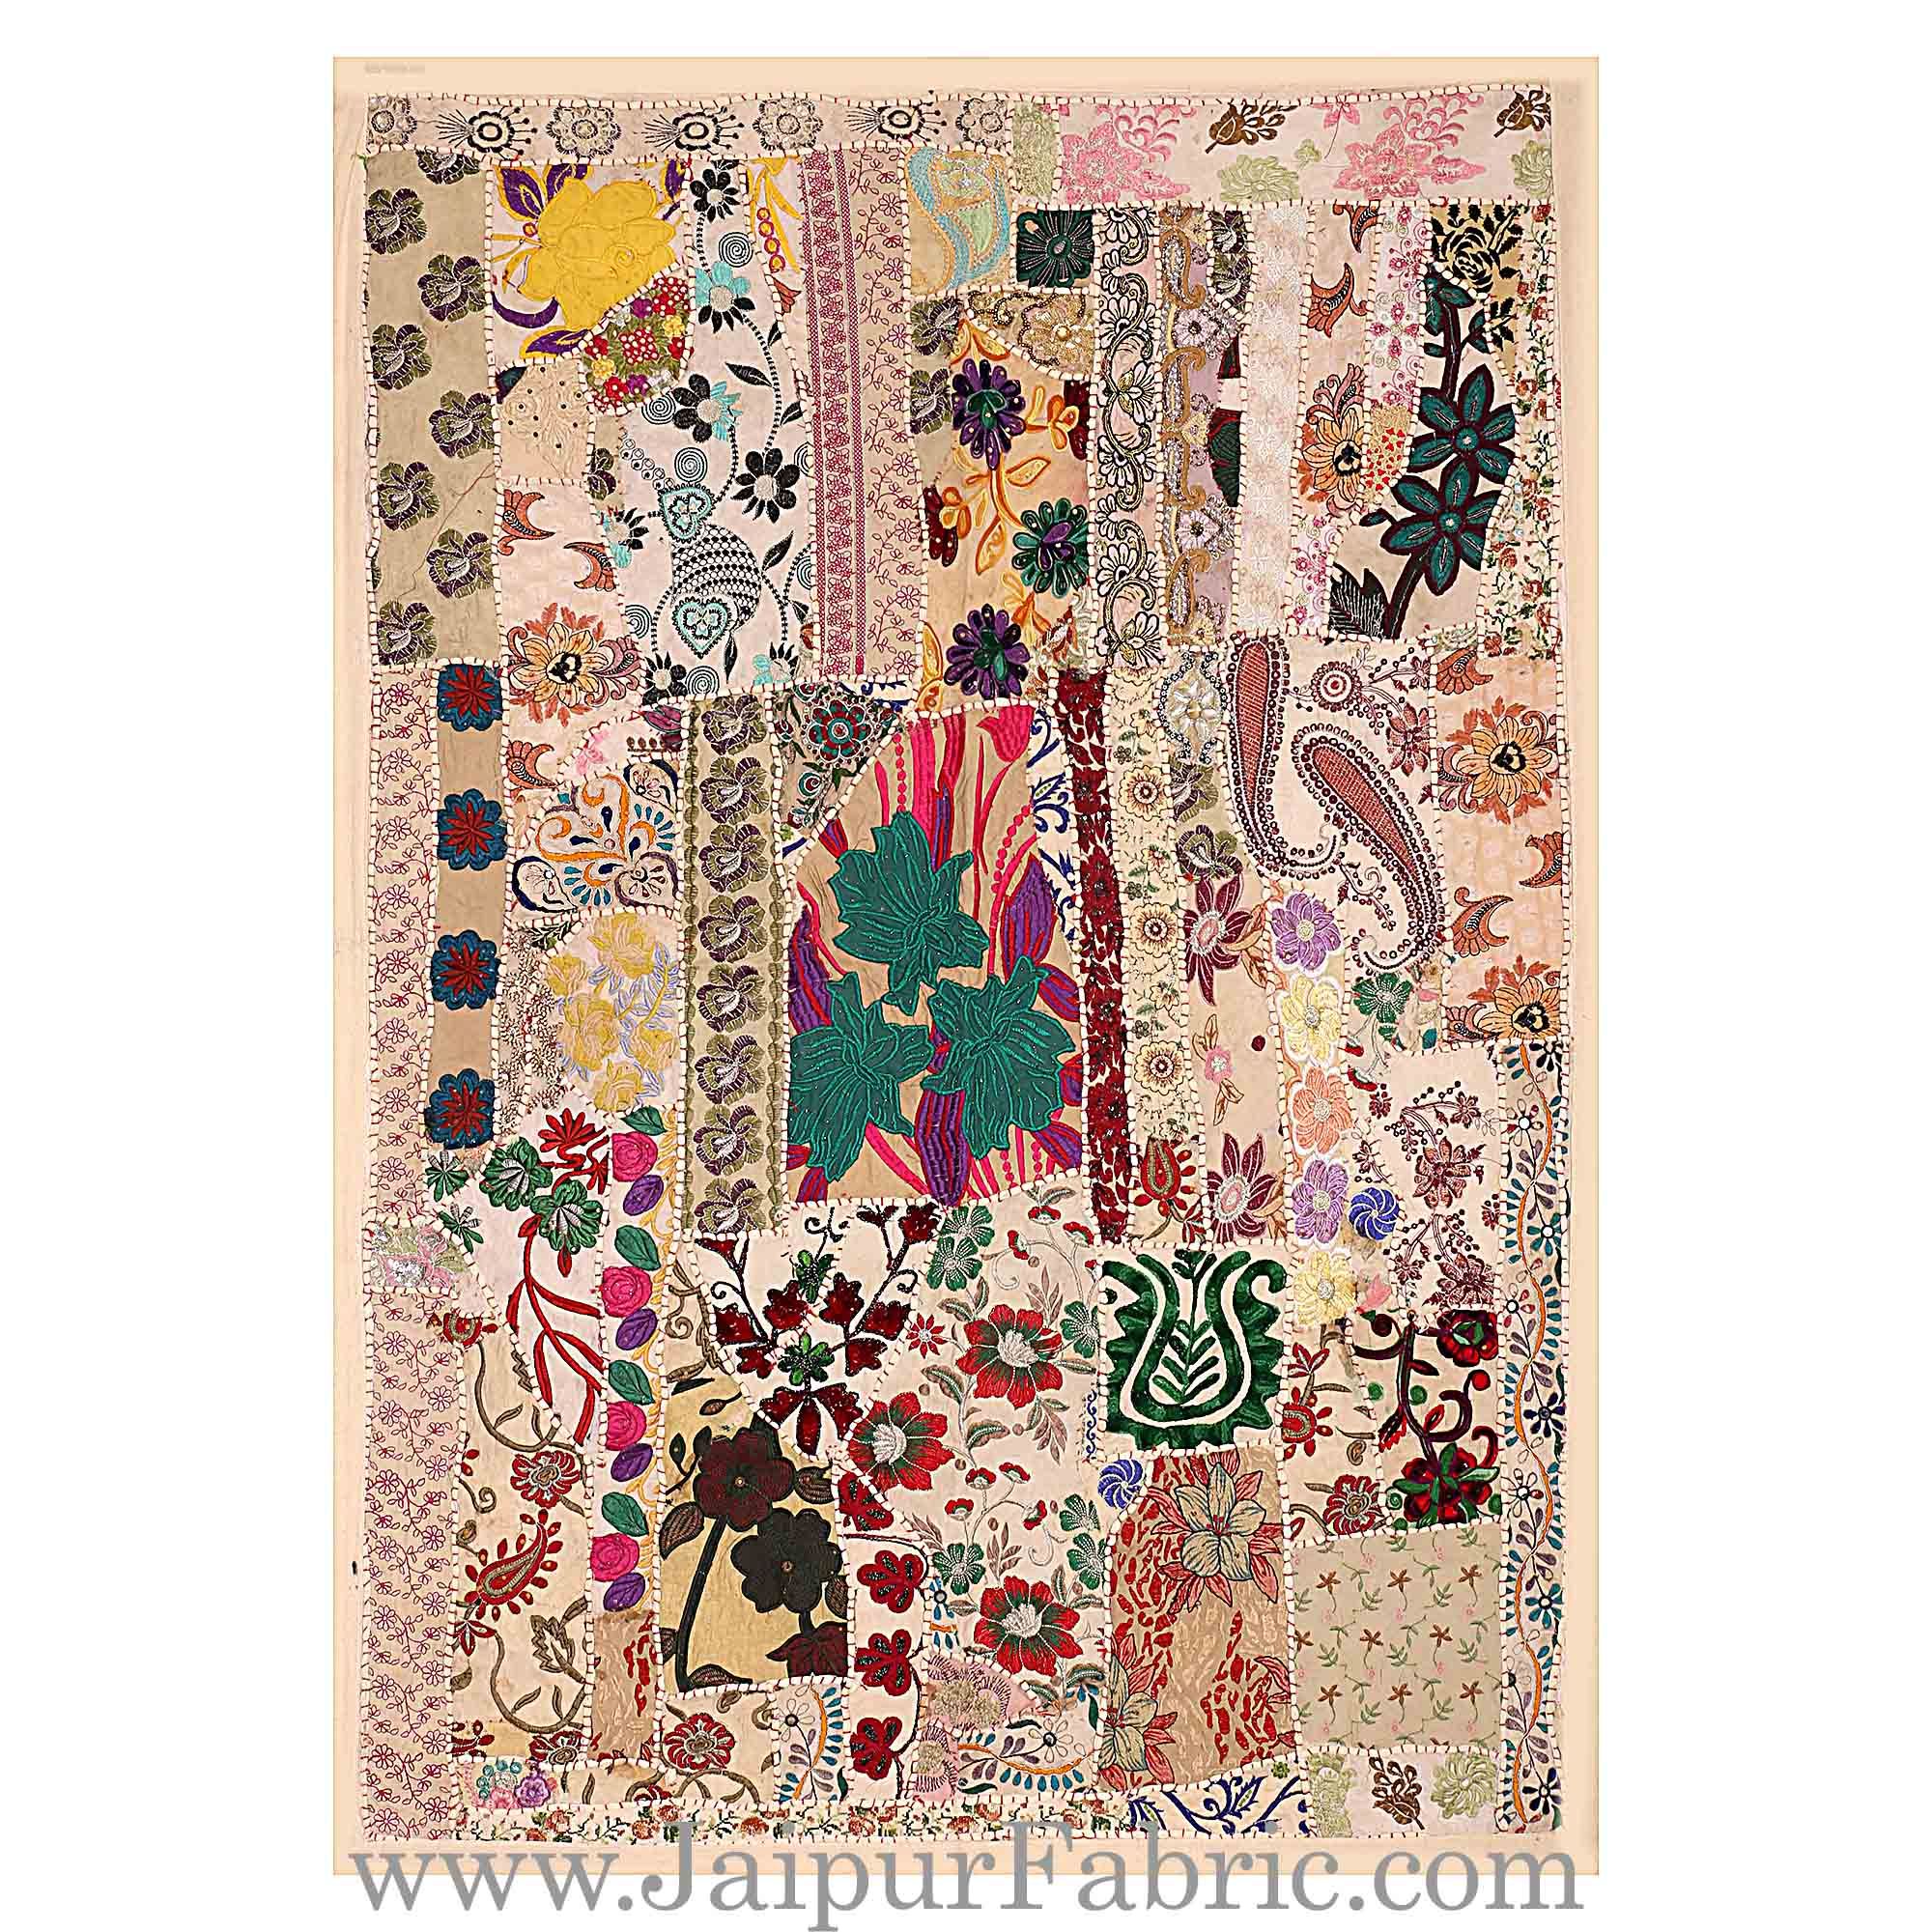 Embroidered patchwork with applique work Wall Decor Wall Hanging